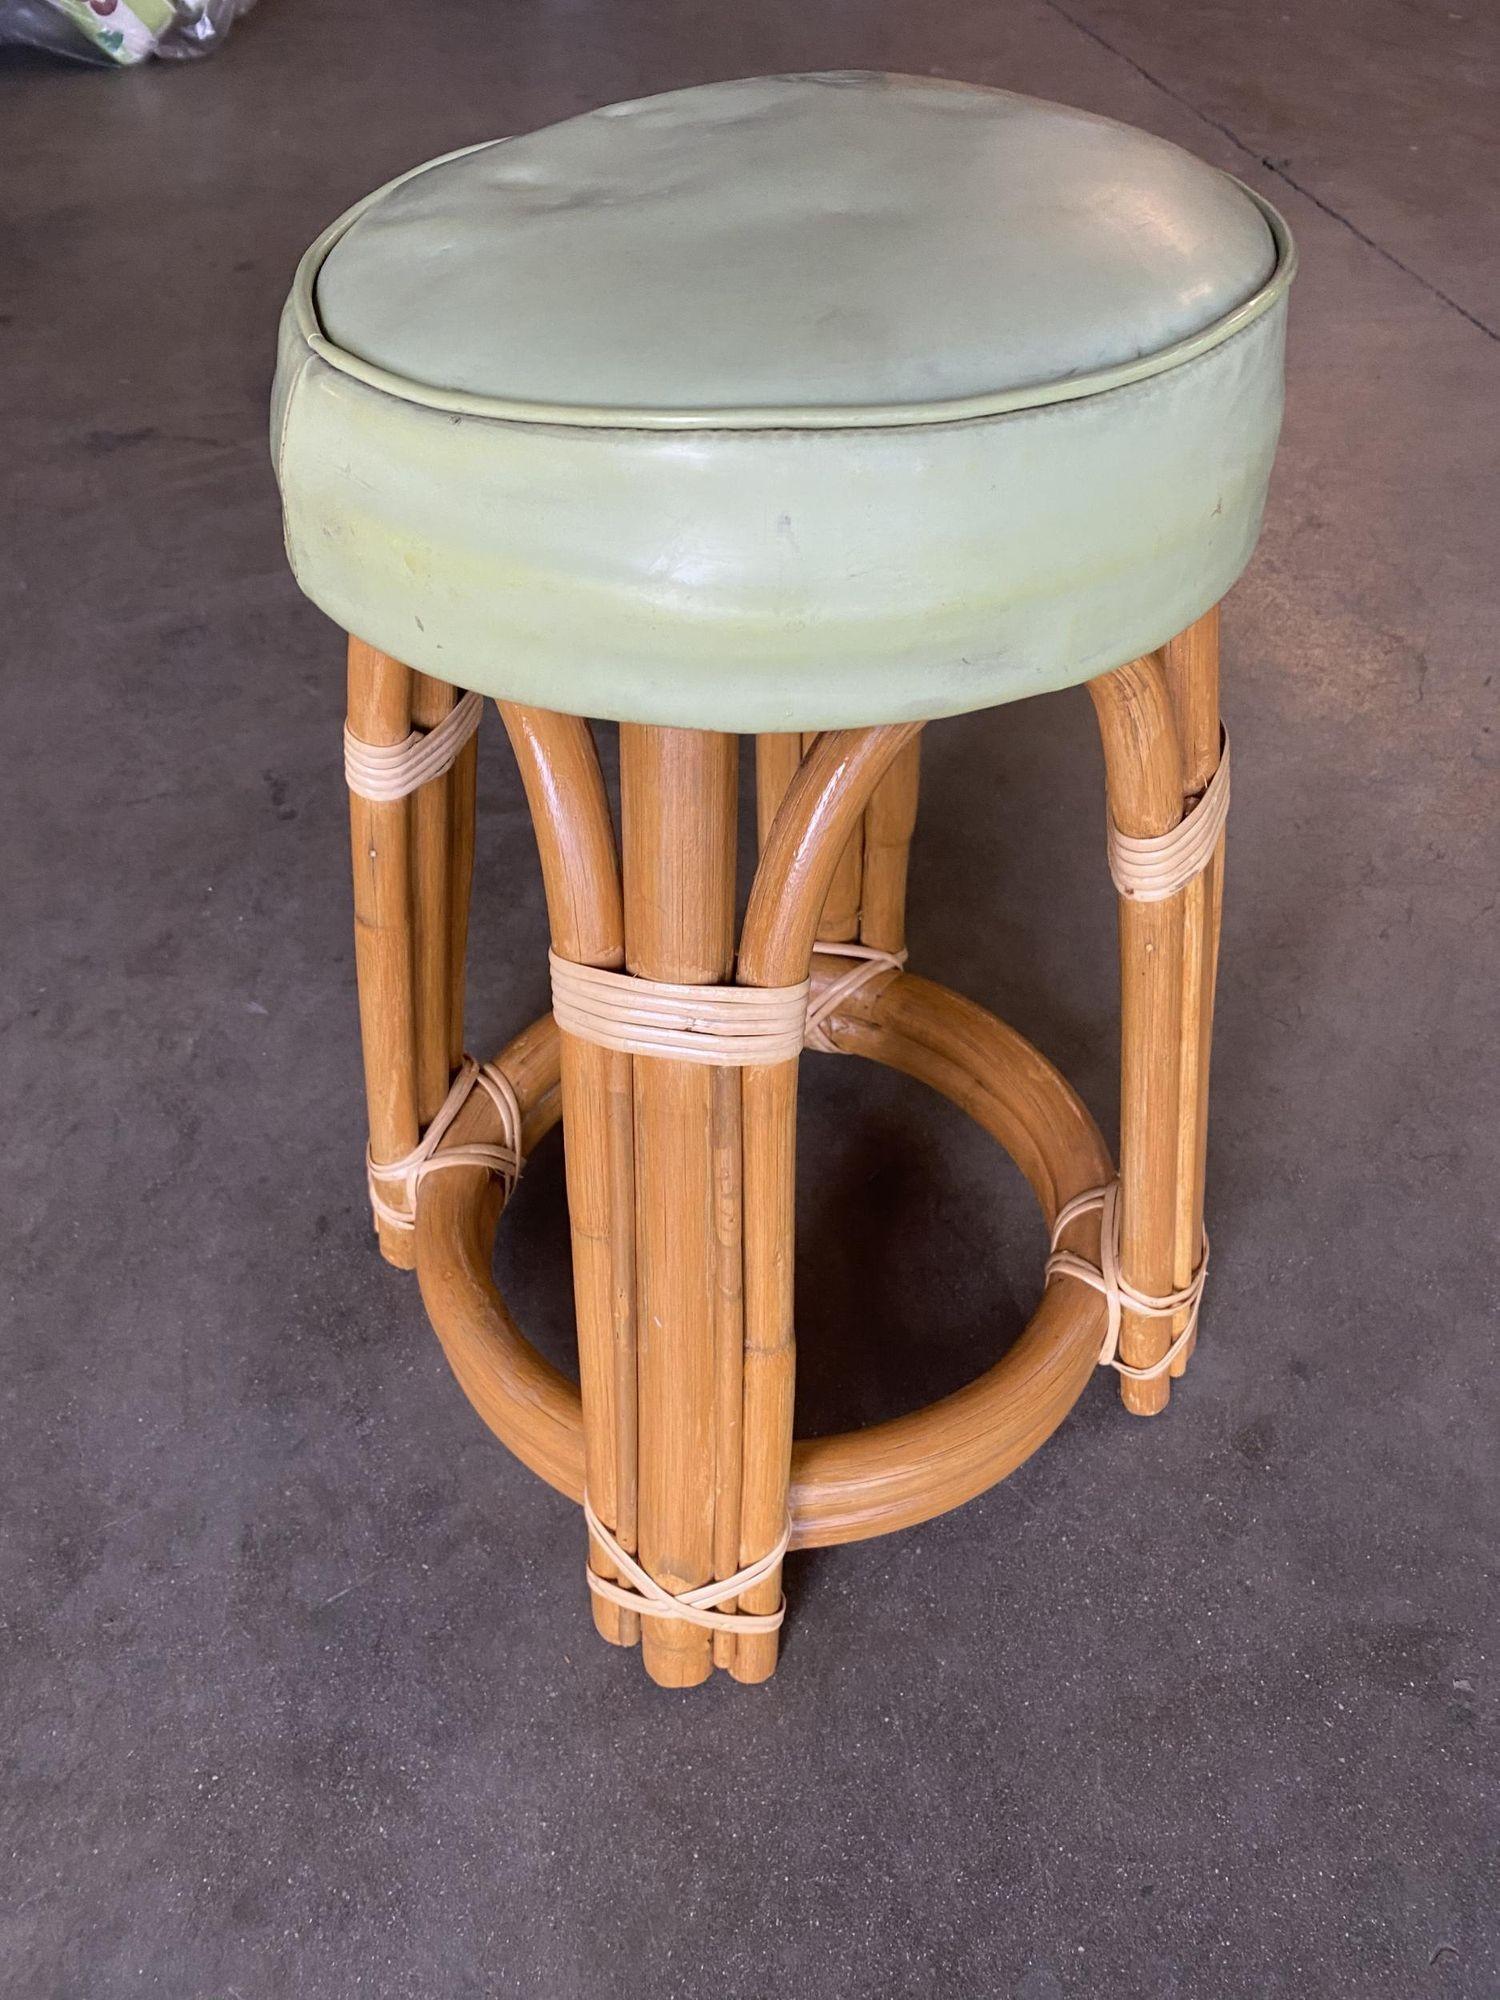 Restored Mid-century single stand arched rattan vanity stool with teal vinyl seat

1950, United States

We only purchase and sell the best and finest rattan furniture made by the best and most well-known American designers and manufacturers